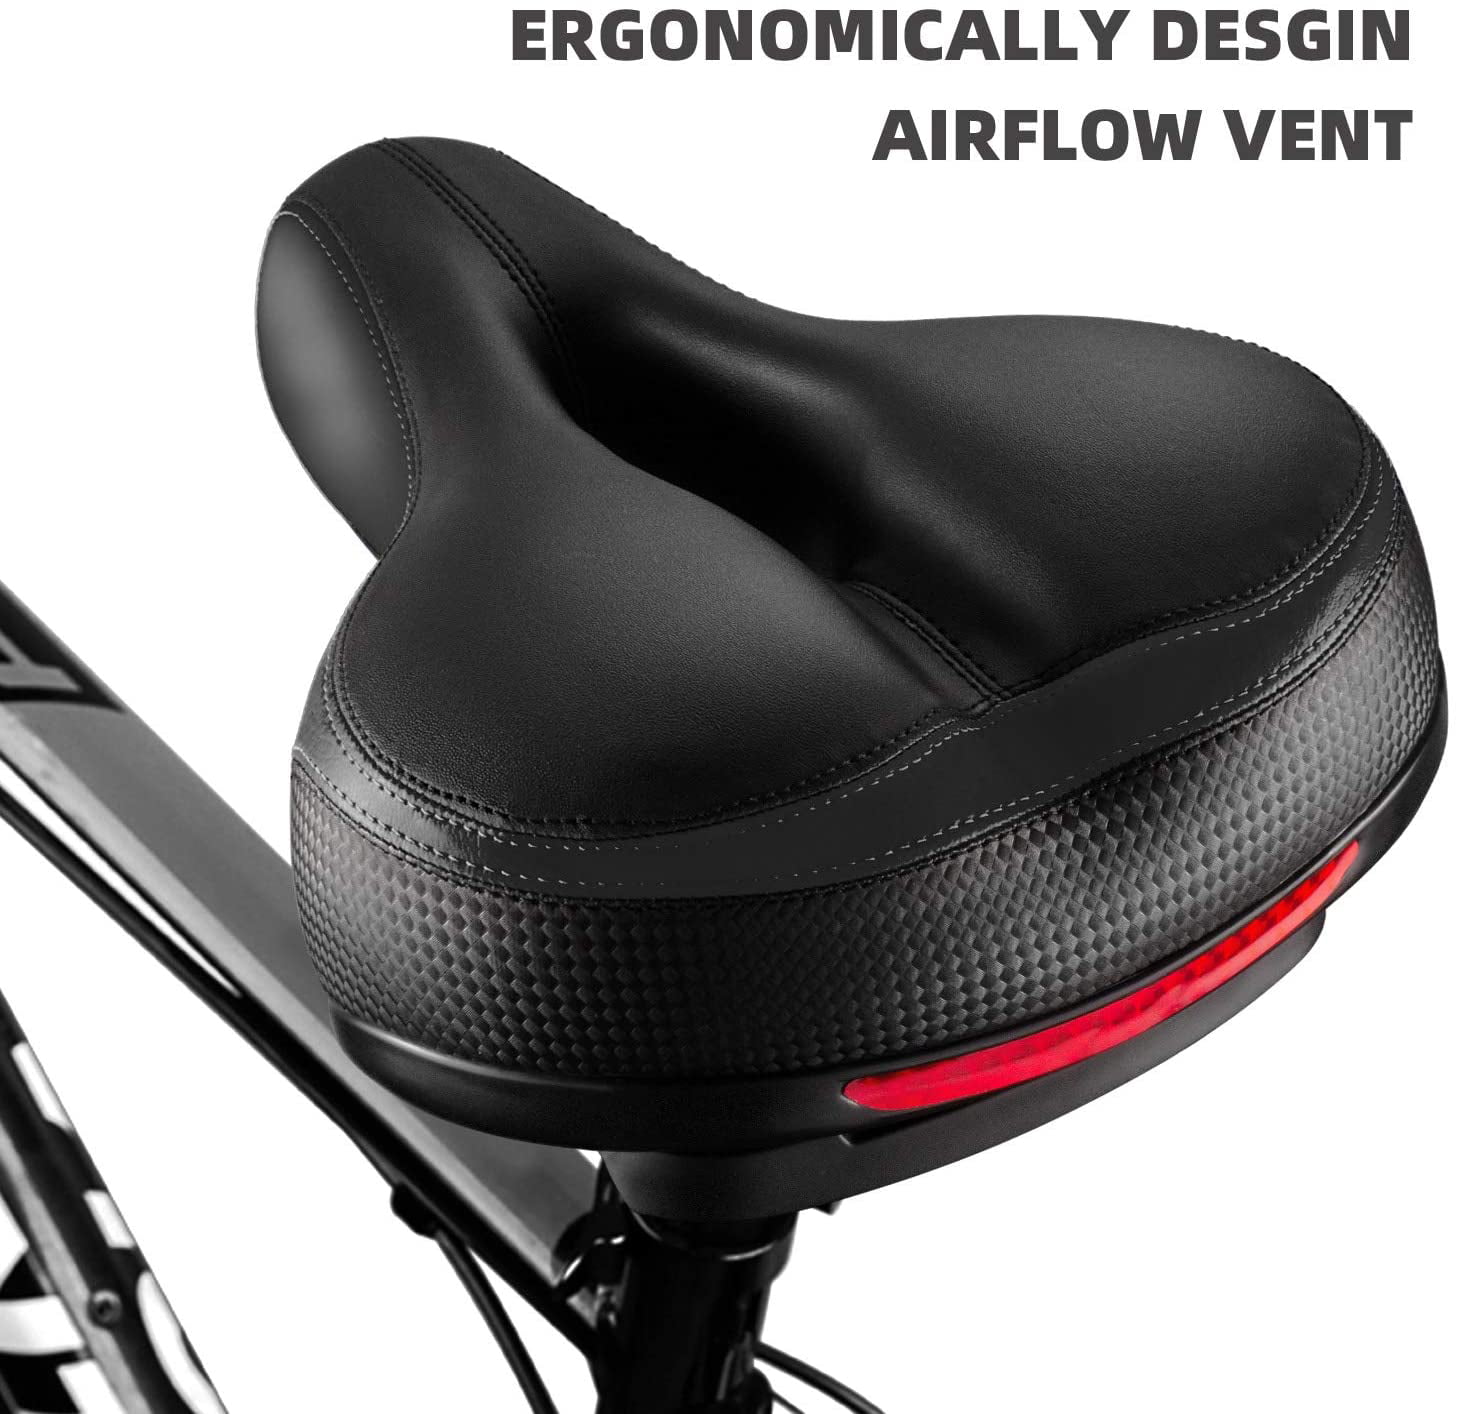 Rear Reflective Sticker Dual Spring Universal Fits Most Bikes Bicycle Saddle Seat Bike Cushion for Men Women Wide Comfort Soft Memory Foam Padded